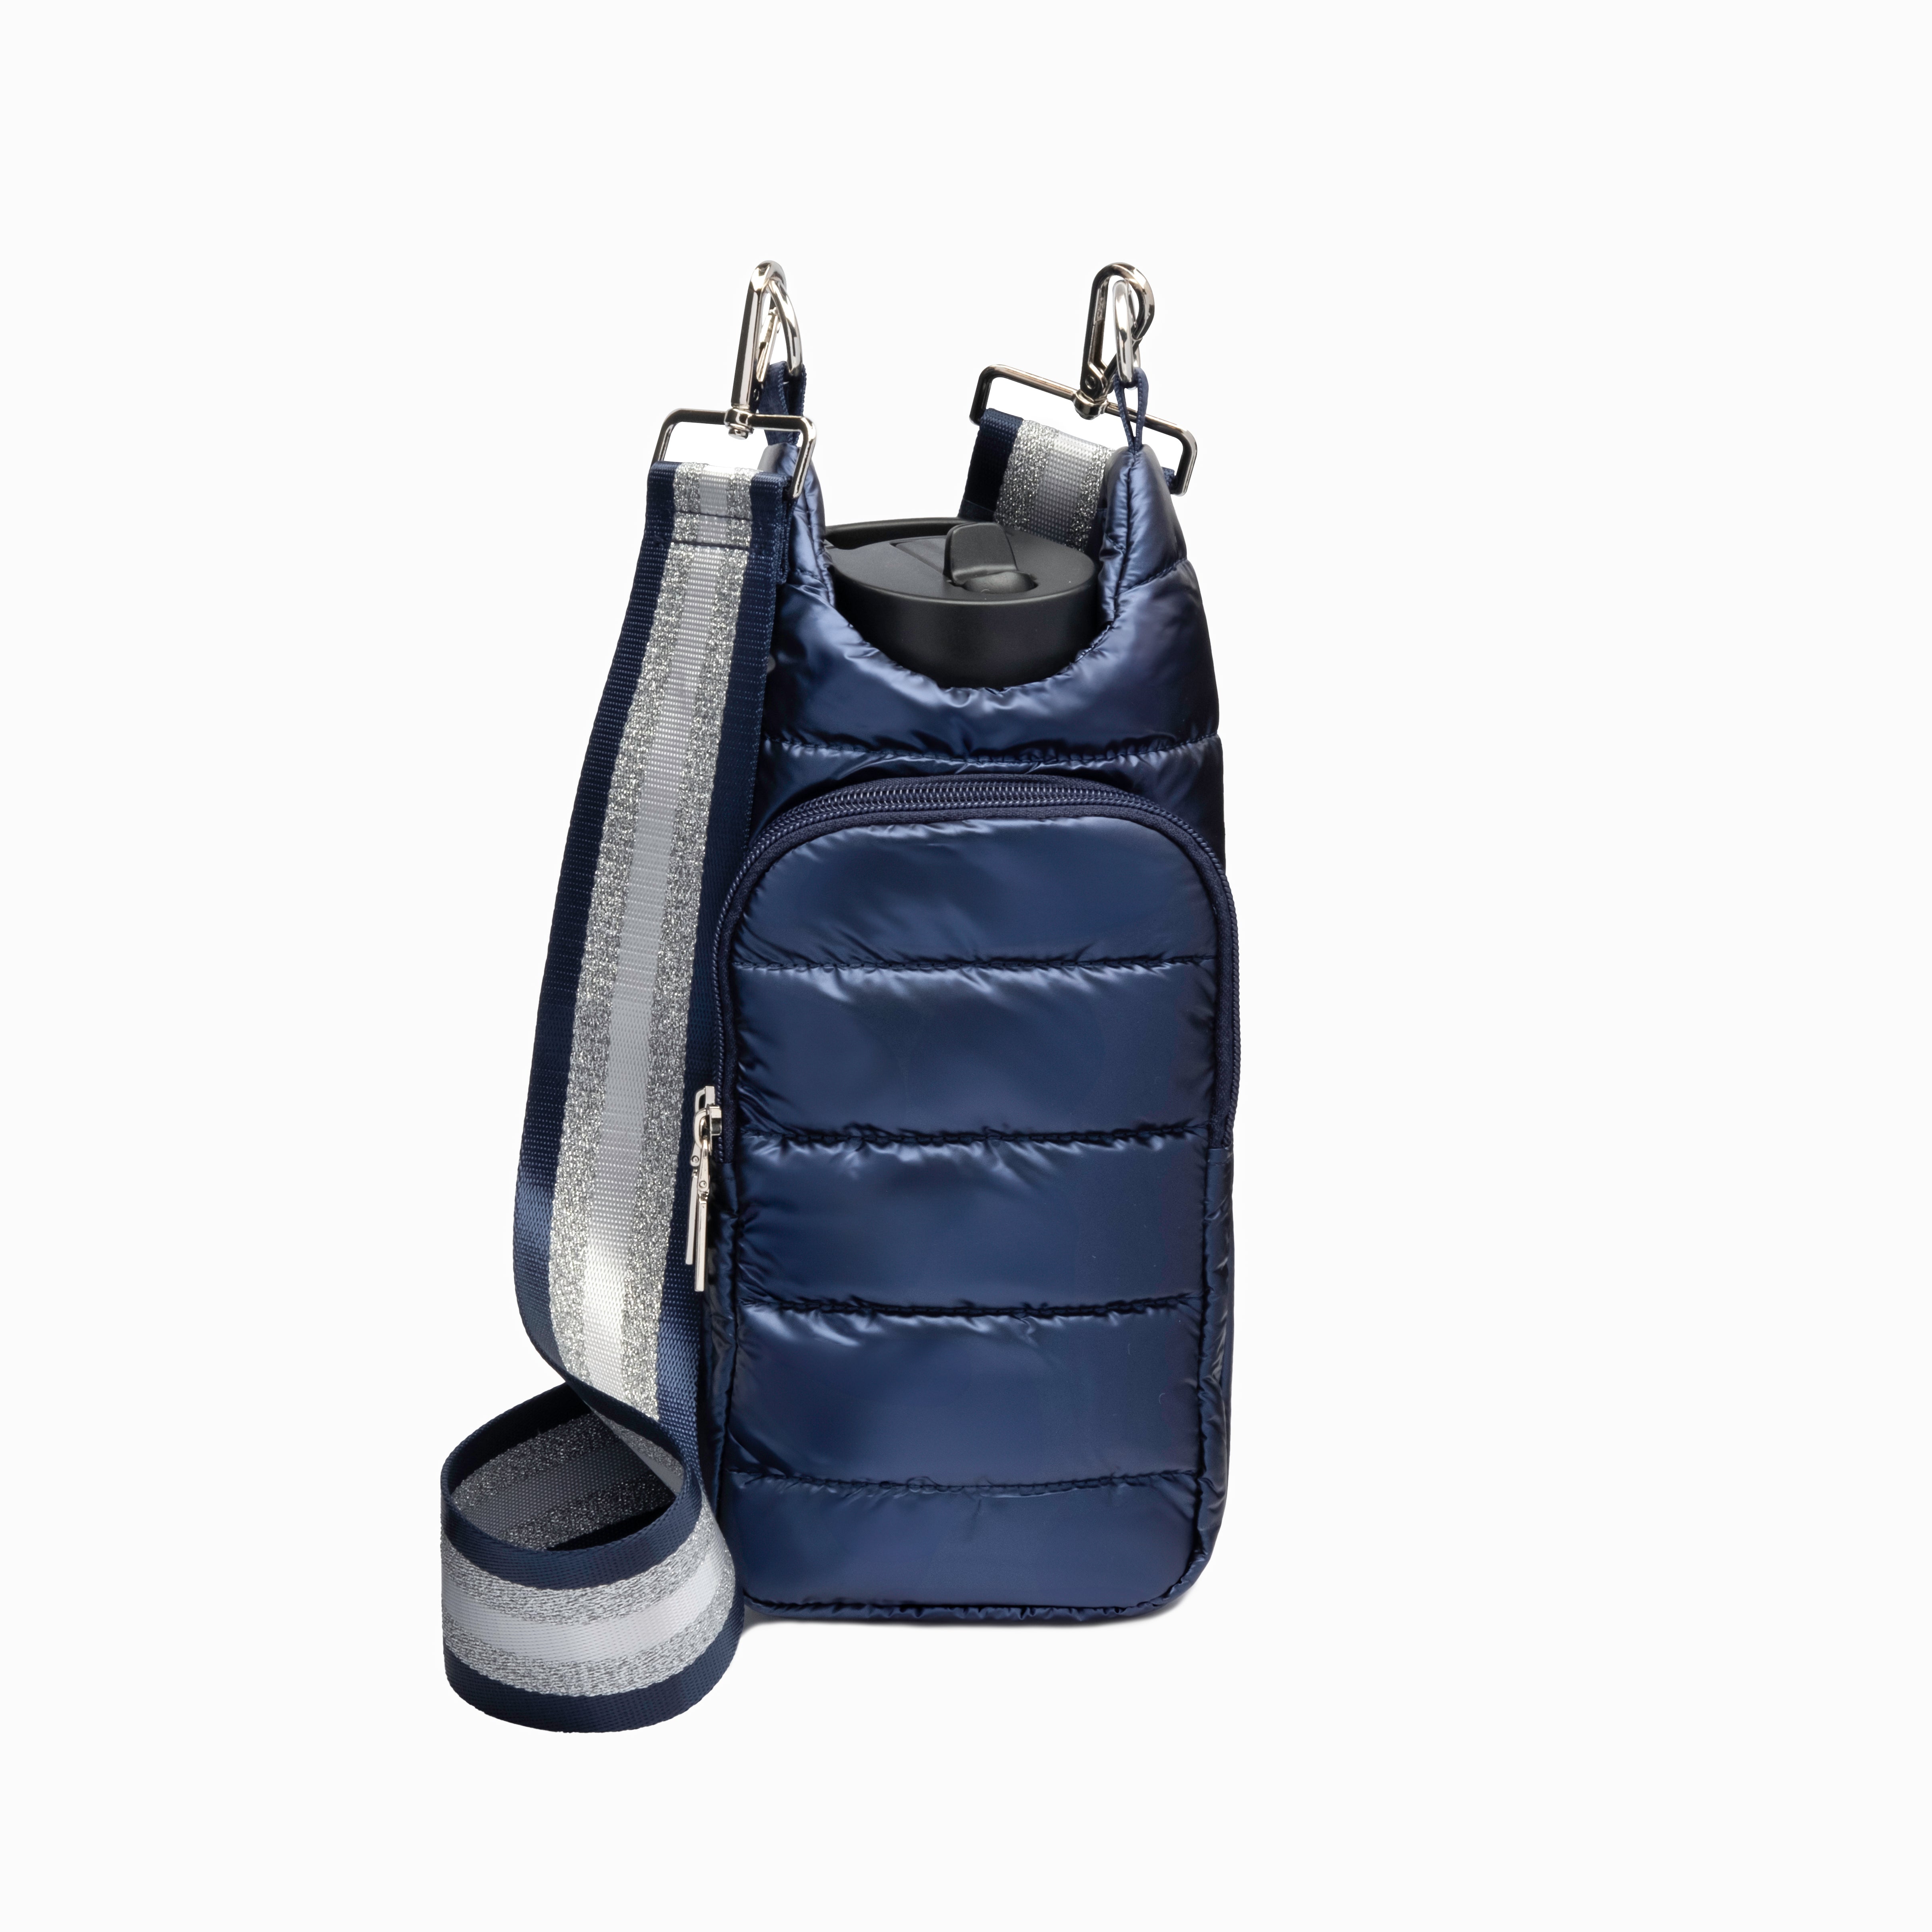 Wholesale Packs (4 or 10) - Navy Blue Shiny HydroBag with Navy/Silver/White Strap